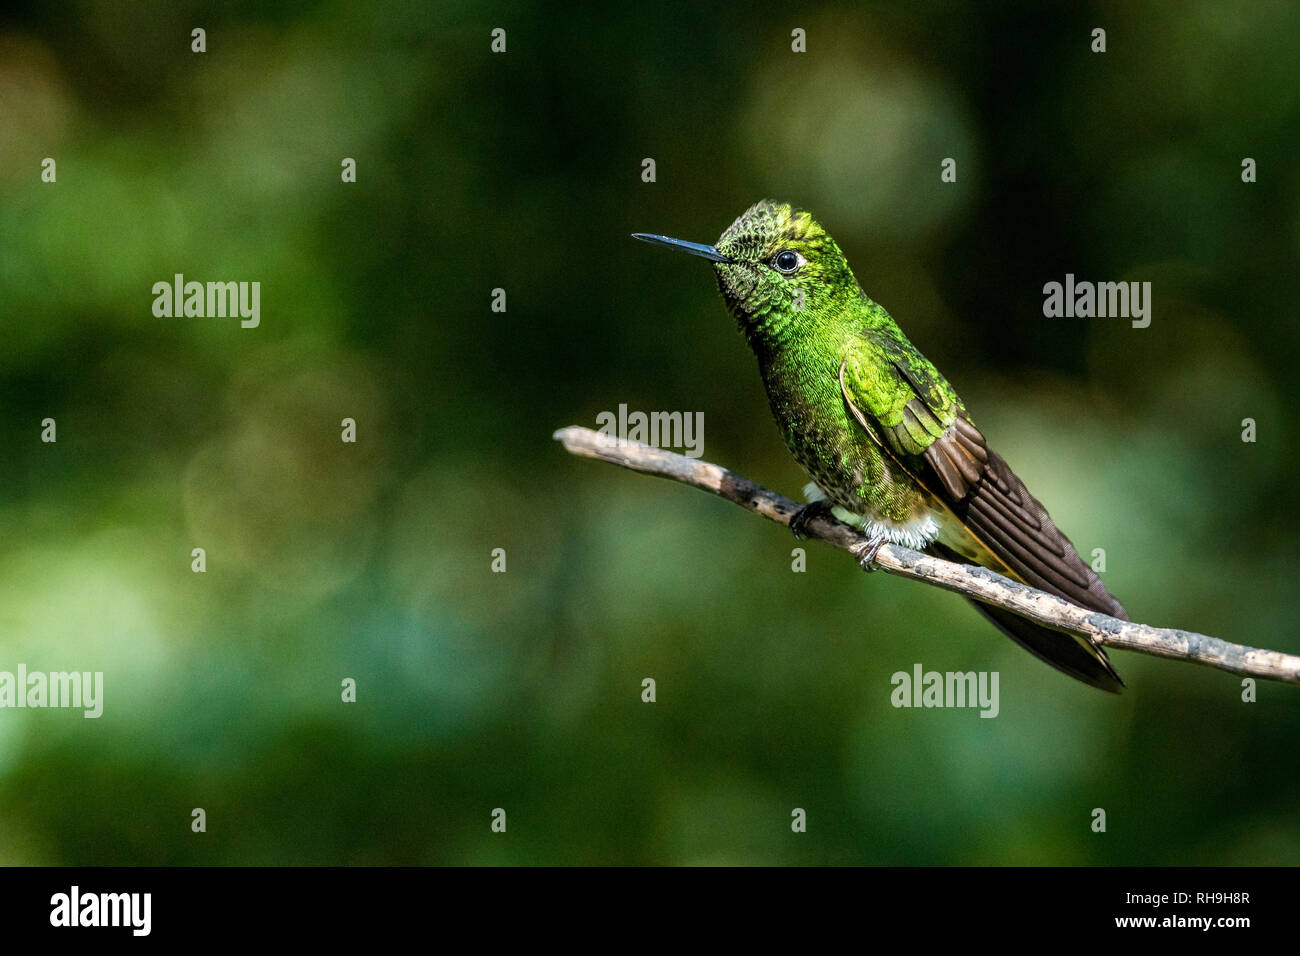 a humming-bird in Reserva Natual Acaime. Photographed in the wonderful High-altitude Forest of Colombia Stock Photo